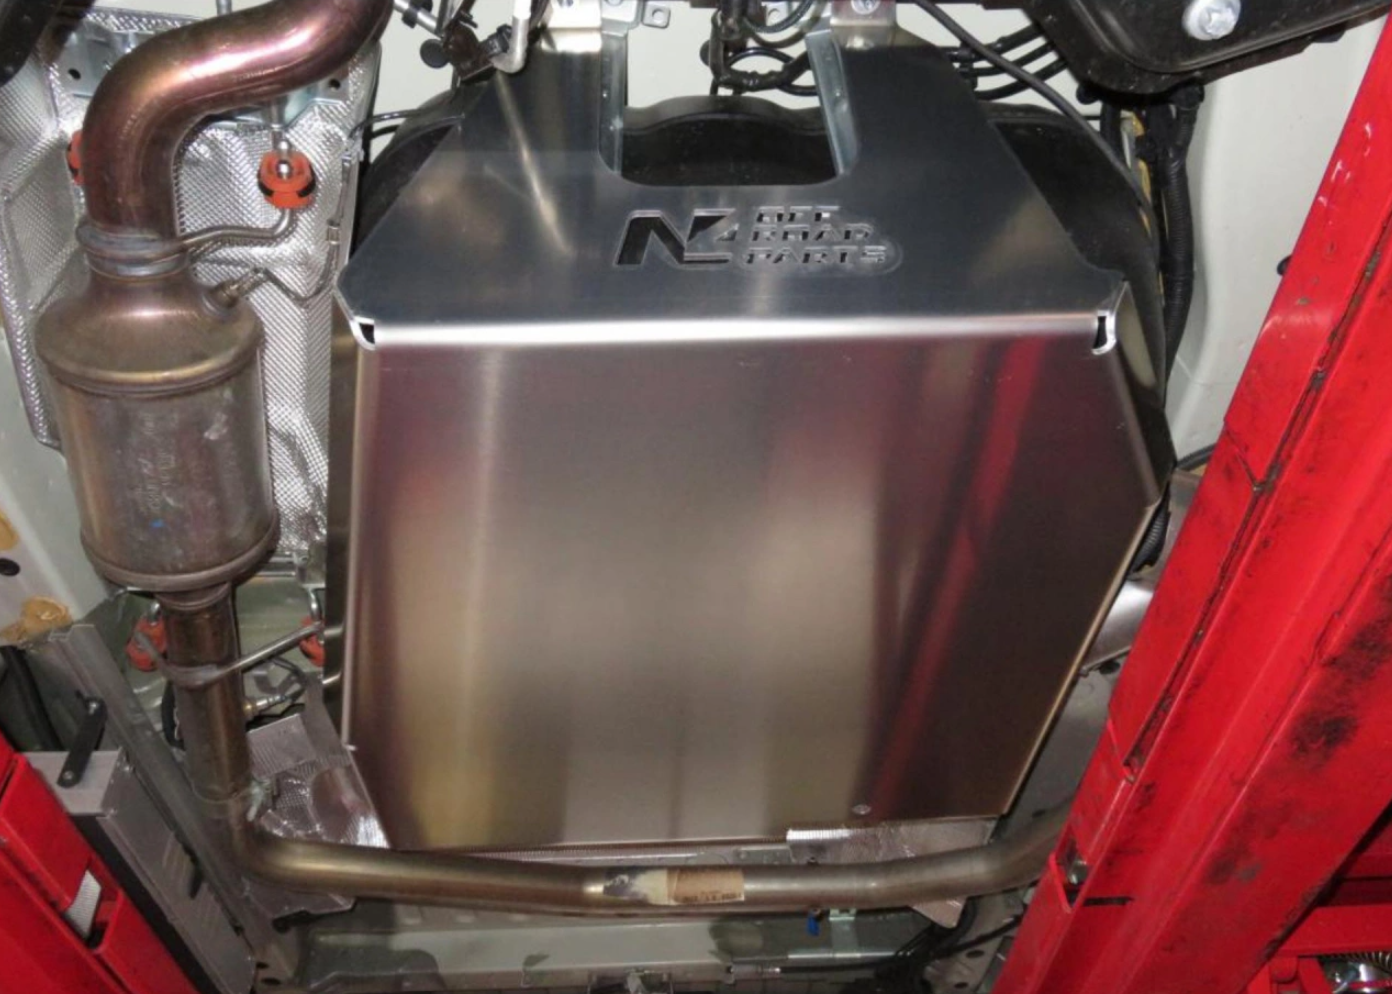 view from underneath a vehicle with an N4 aluminum armor mounted